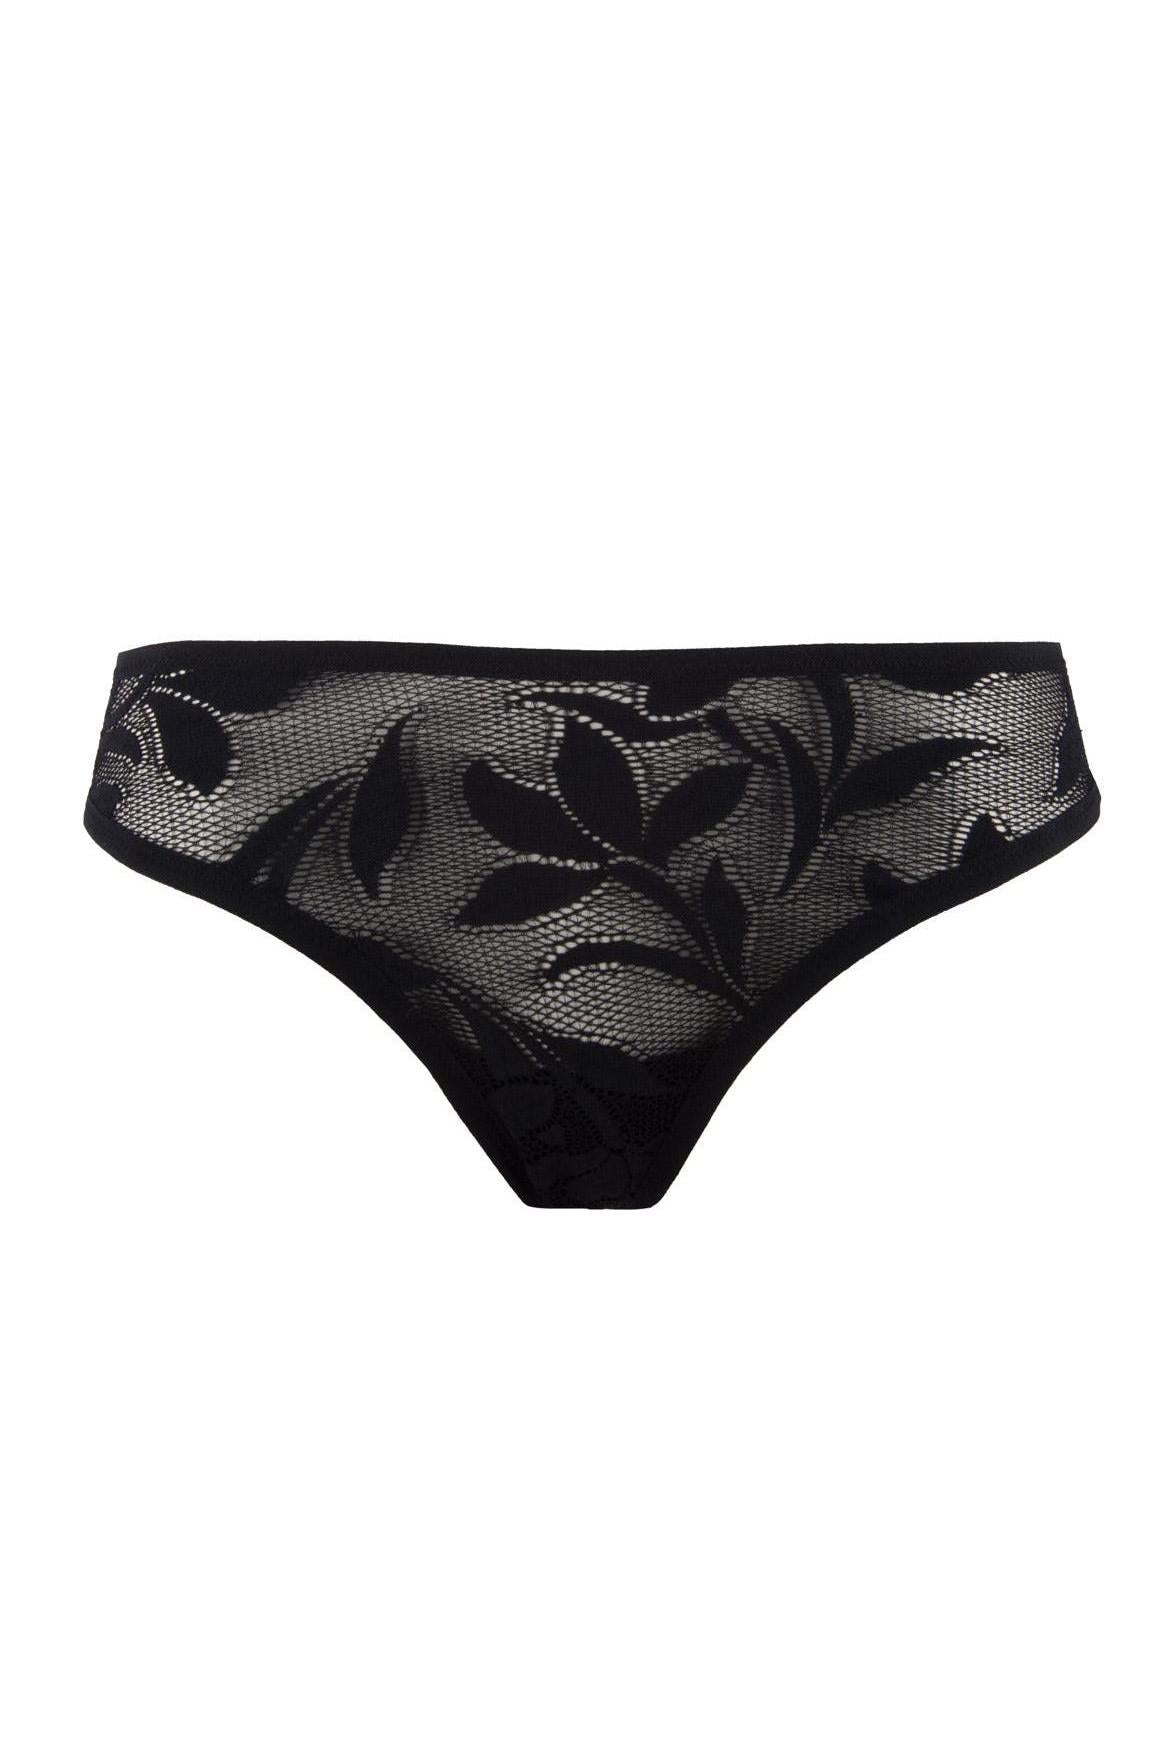 Epure P51 Dentelle Tulipes STRING 0005 NO/NOIR buy for the best price CAD$  71.00 - Canada and U.S. delivery – Bralissimo